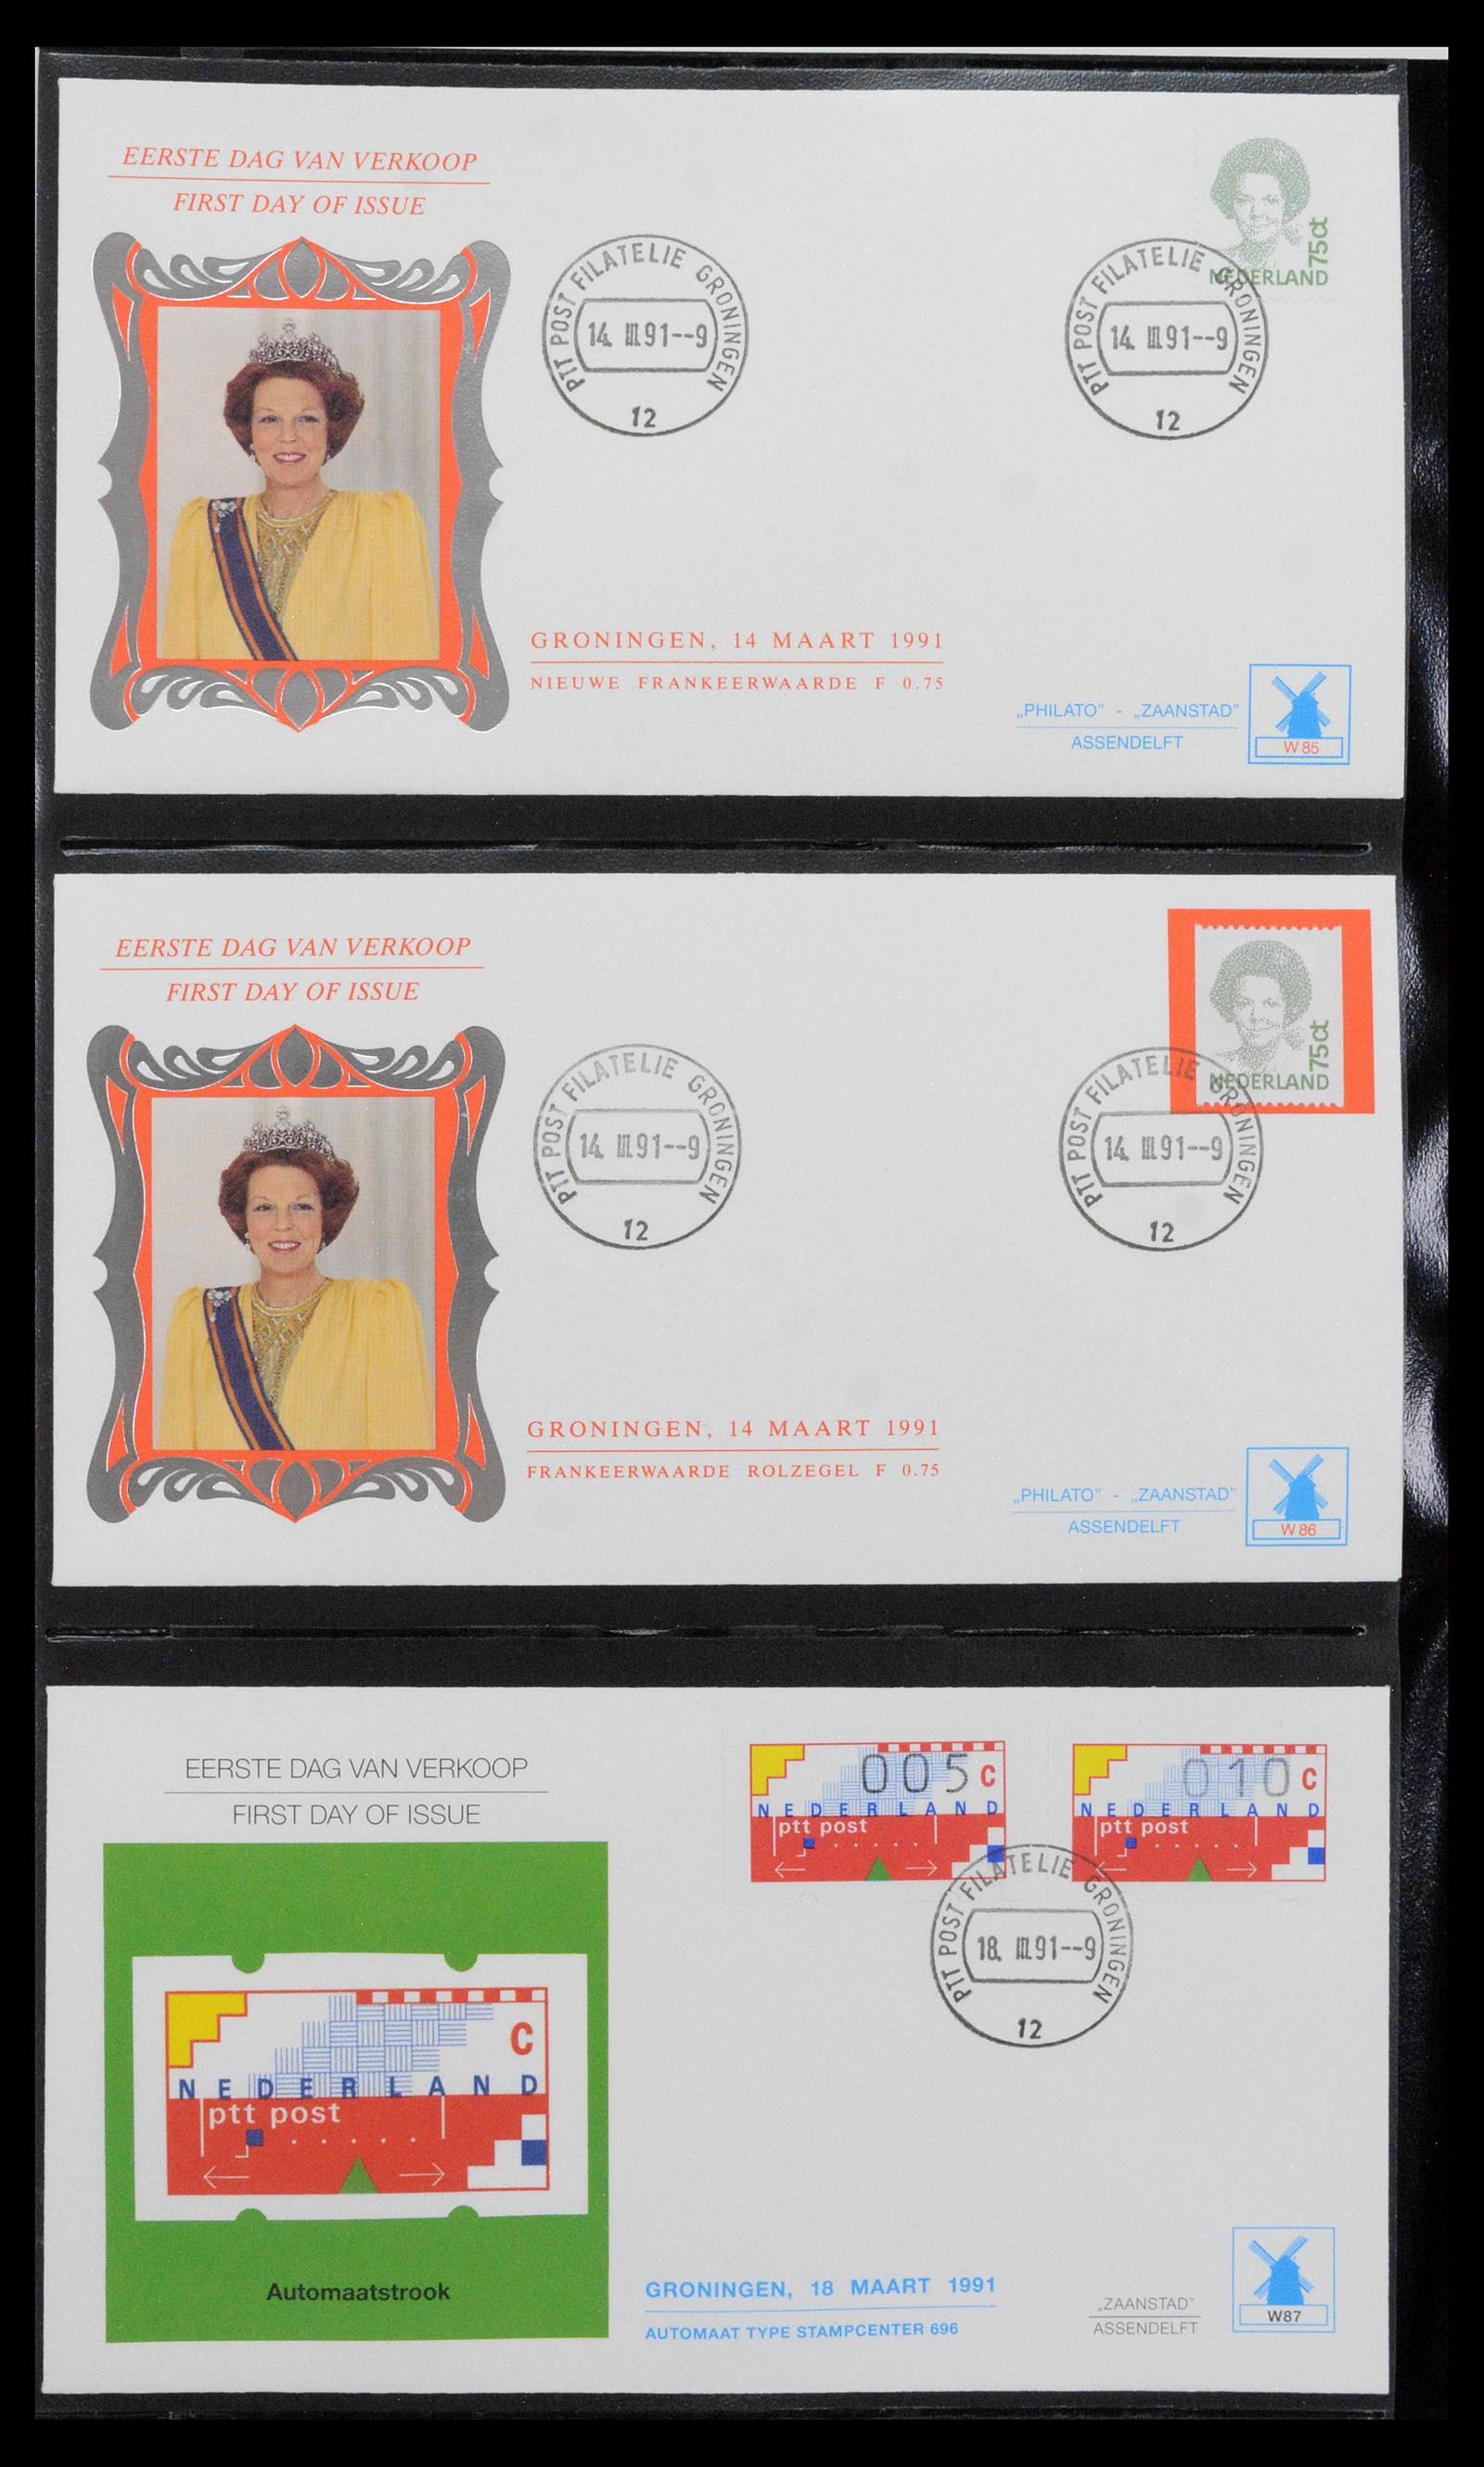 38559 0030 - Stamp collection 38559 Netherlands special first day covers.